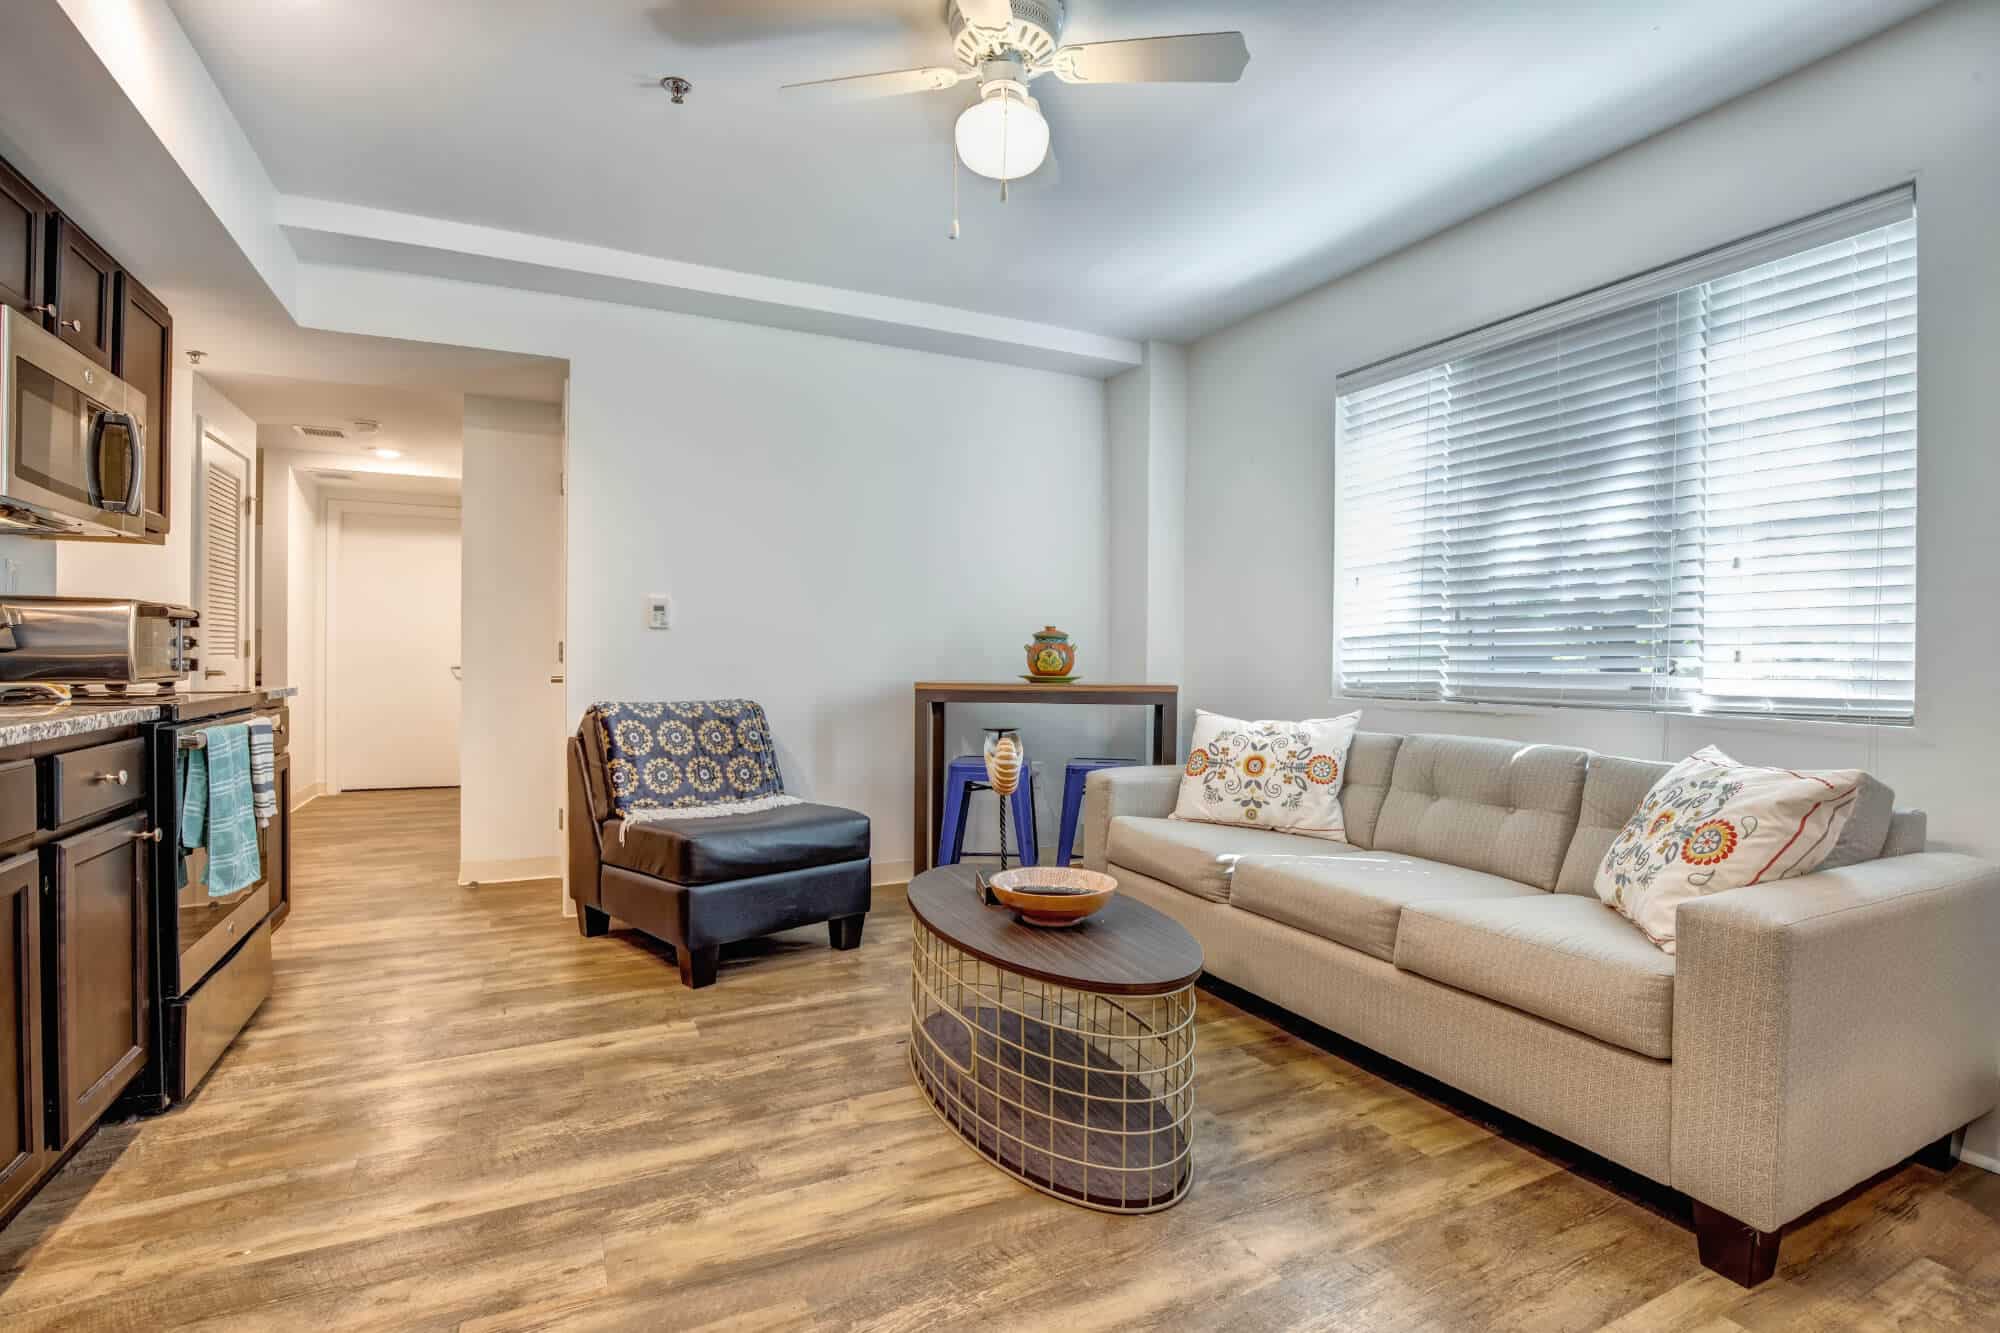 61 vandy off campus apartments near the college of charleston c of c fully furnished living room